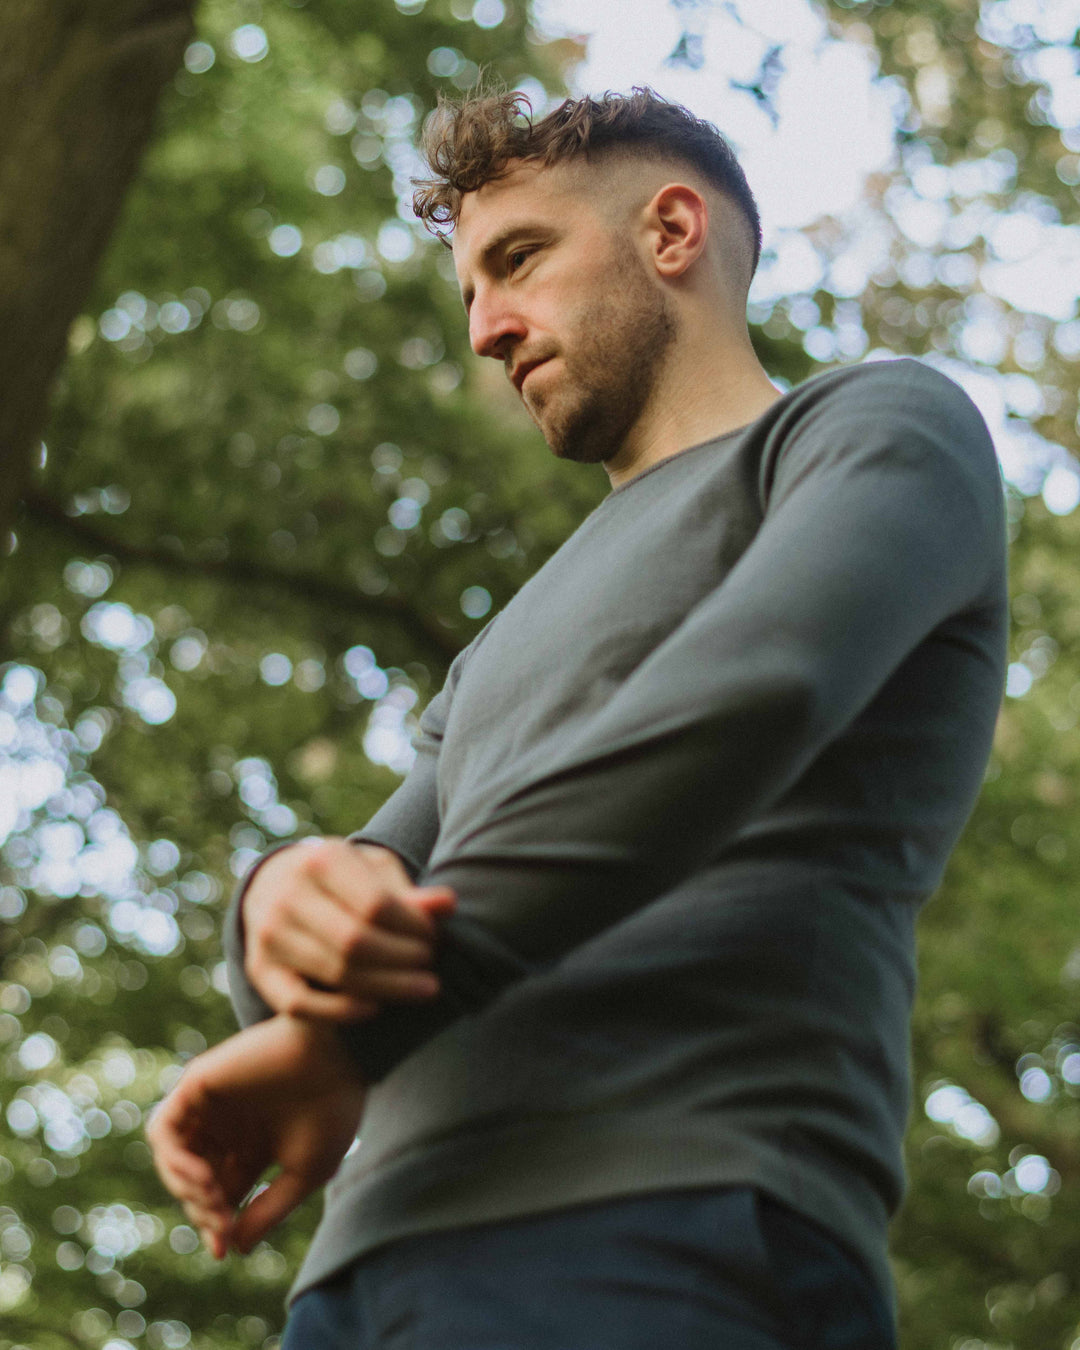 Model walking in the woods wearing our unisex extra-fine merino wool 1/4 zip jumper in storm grey, made from a lightweight fabric and reactive natural fibre. Ideal for layering under our waterproof dry robes for spectating touchdown sports or walking the dog. The perfect addition to any minimalist capsule wardrobe.